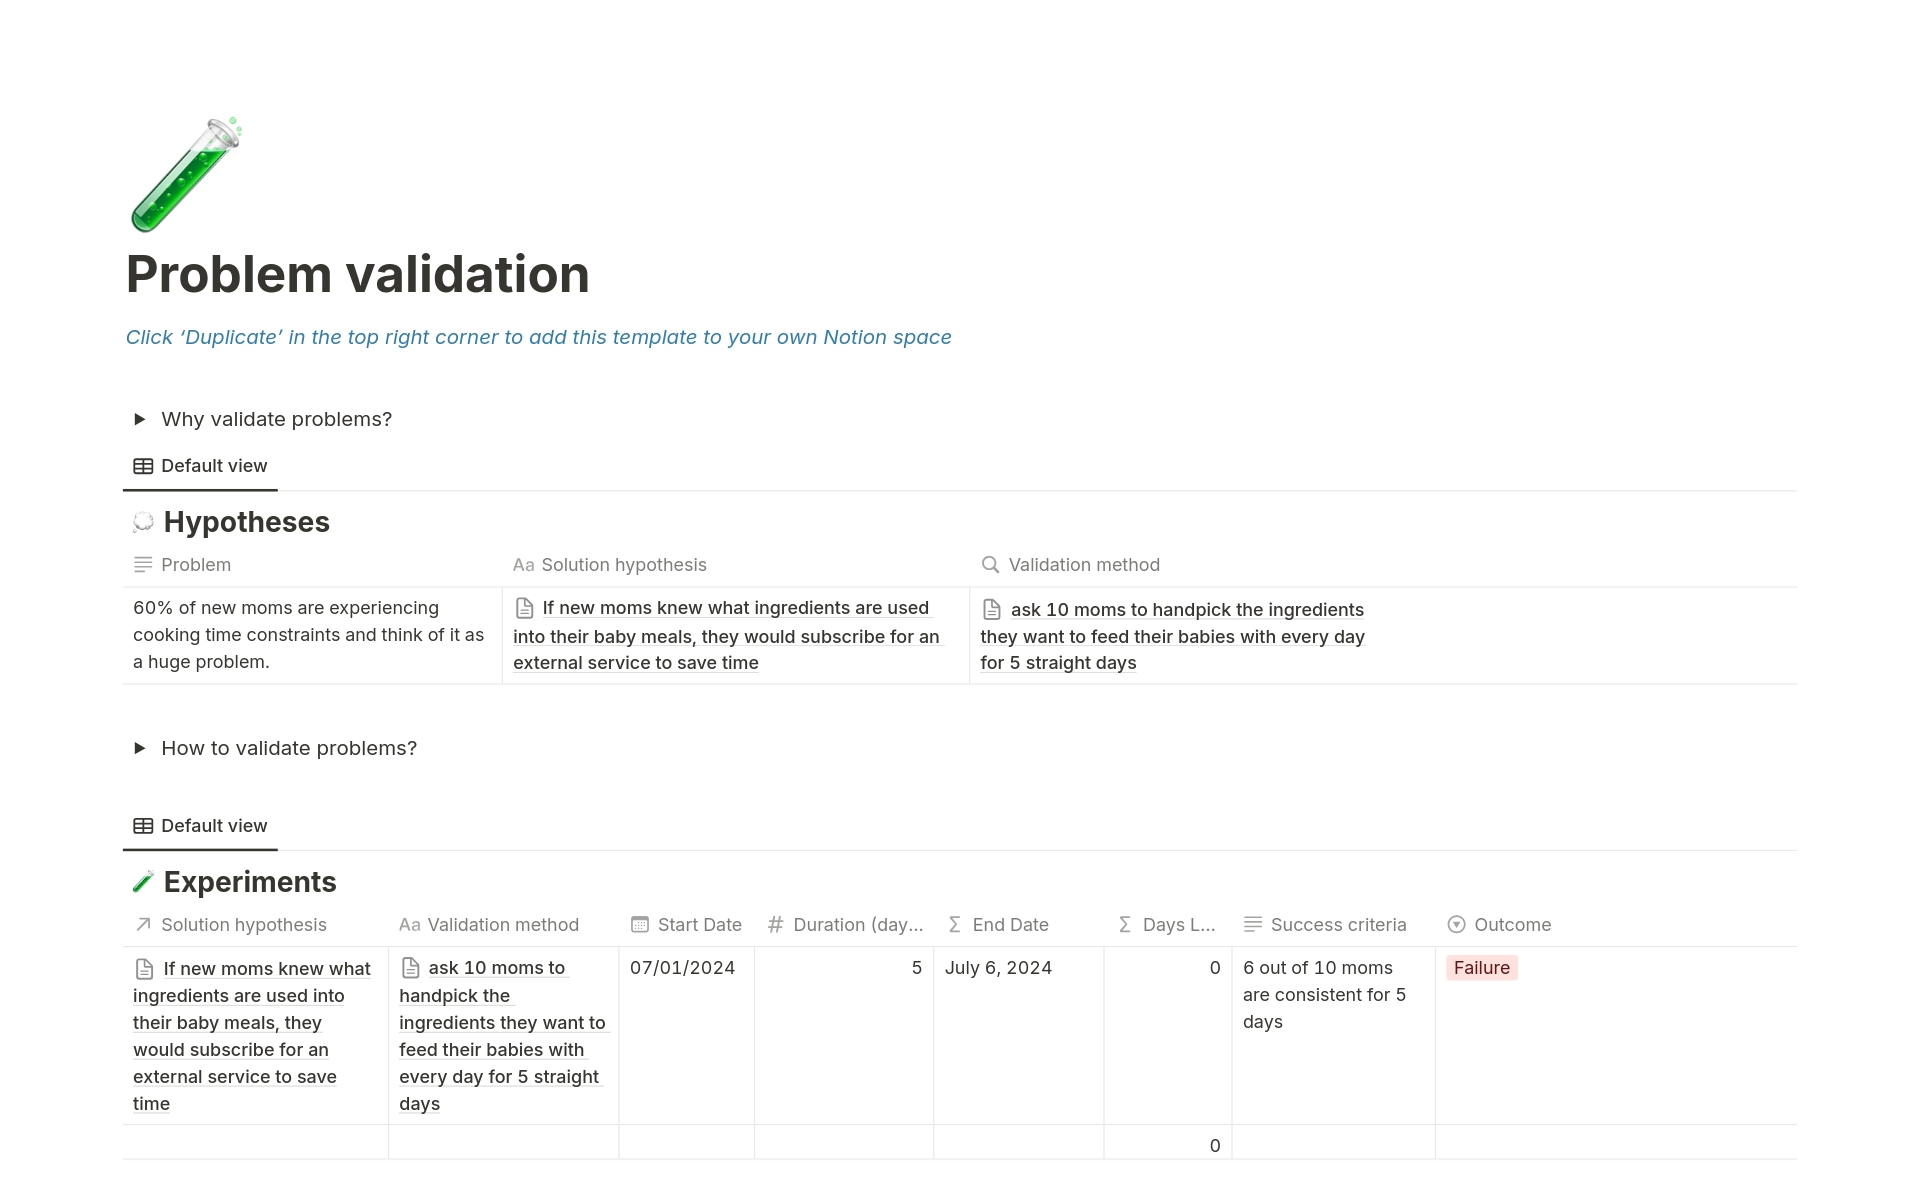 This Notion template empowers startup founders to validate their problem hypotheses through experimenting without allocating huge budgets. It guides you through a structured process to ensure the problem you solve is real, relevant, and impactful for your target users.